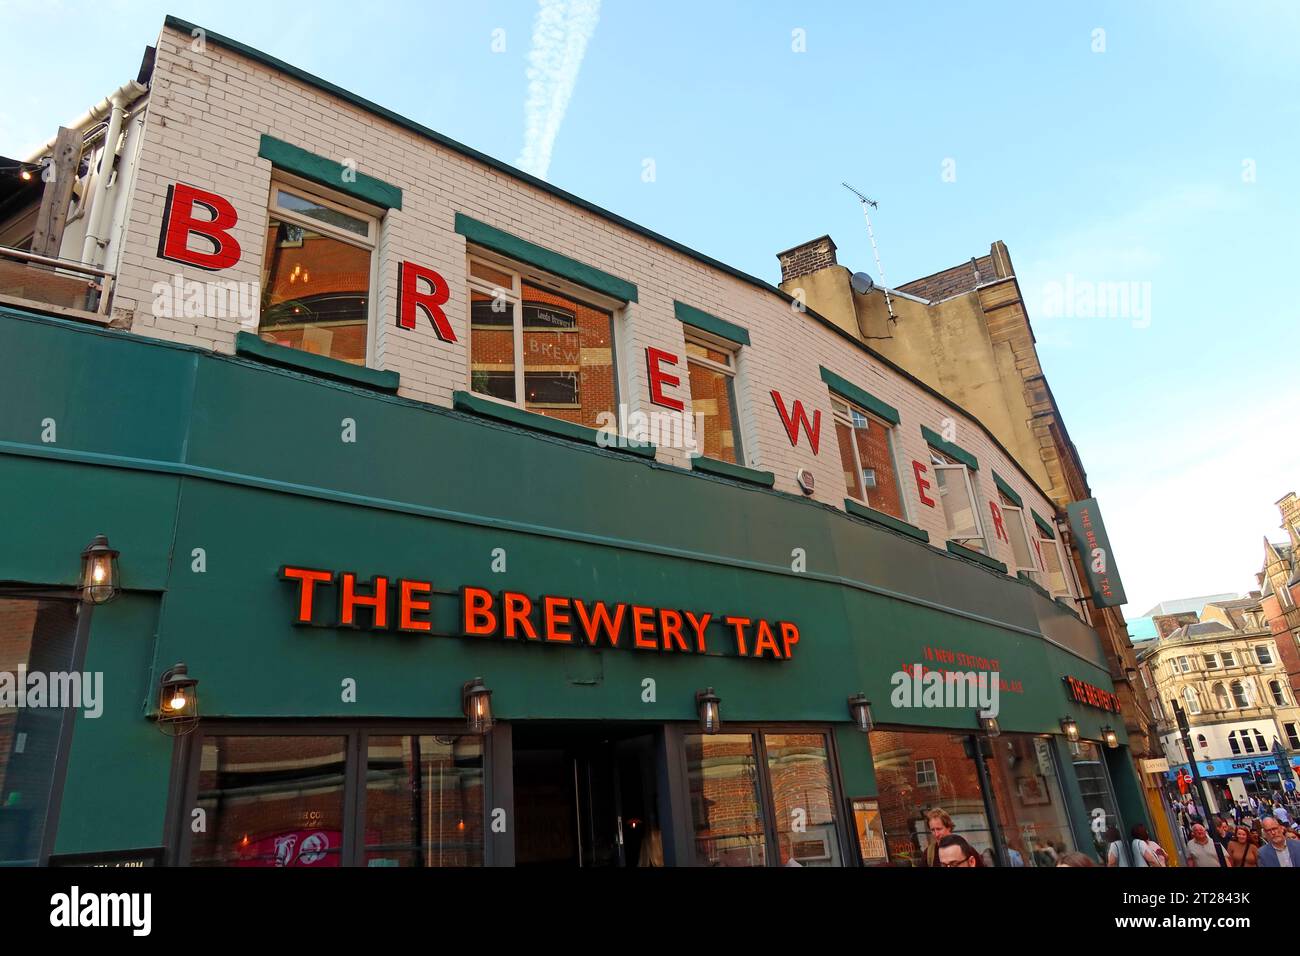 The Brewery Tap, Leeds, 18 New Station St, Leeds, England, UK, LS1 5DL Stockfoto